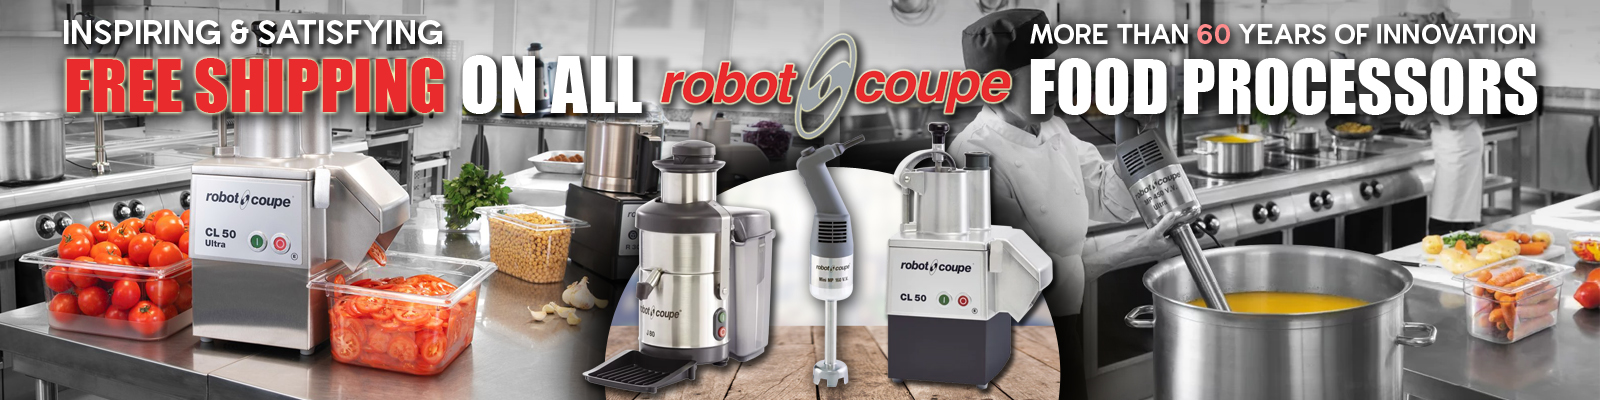 Robot Coupe Commercial Food Processors, Robot Coupe Food Preparation Equipment